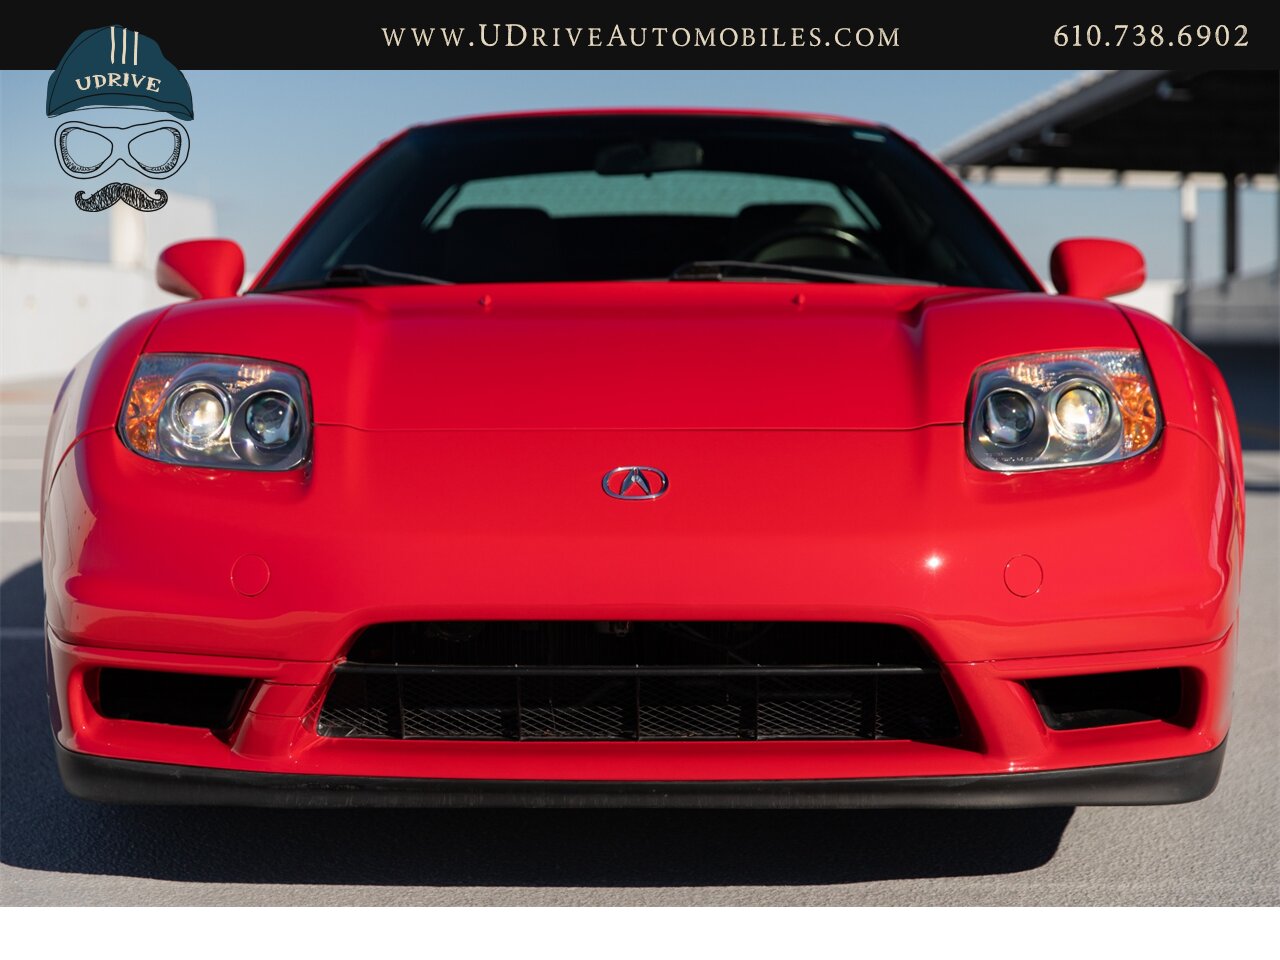 2004 Acura NSX NSX-T 21k mIles Red over Black  Fresh Timing Belt Service - Photo 12 - West Chester, PA 19382